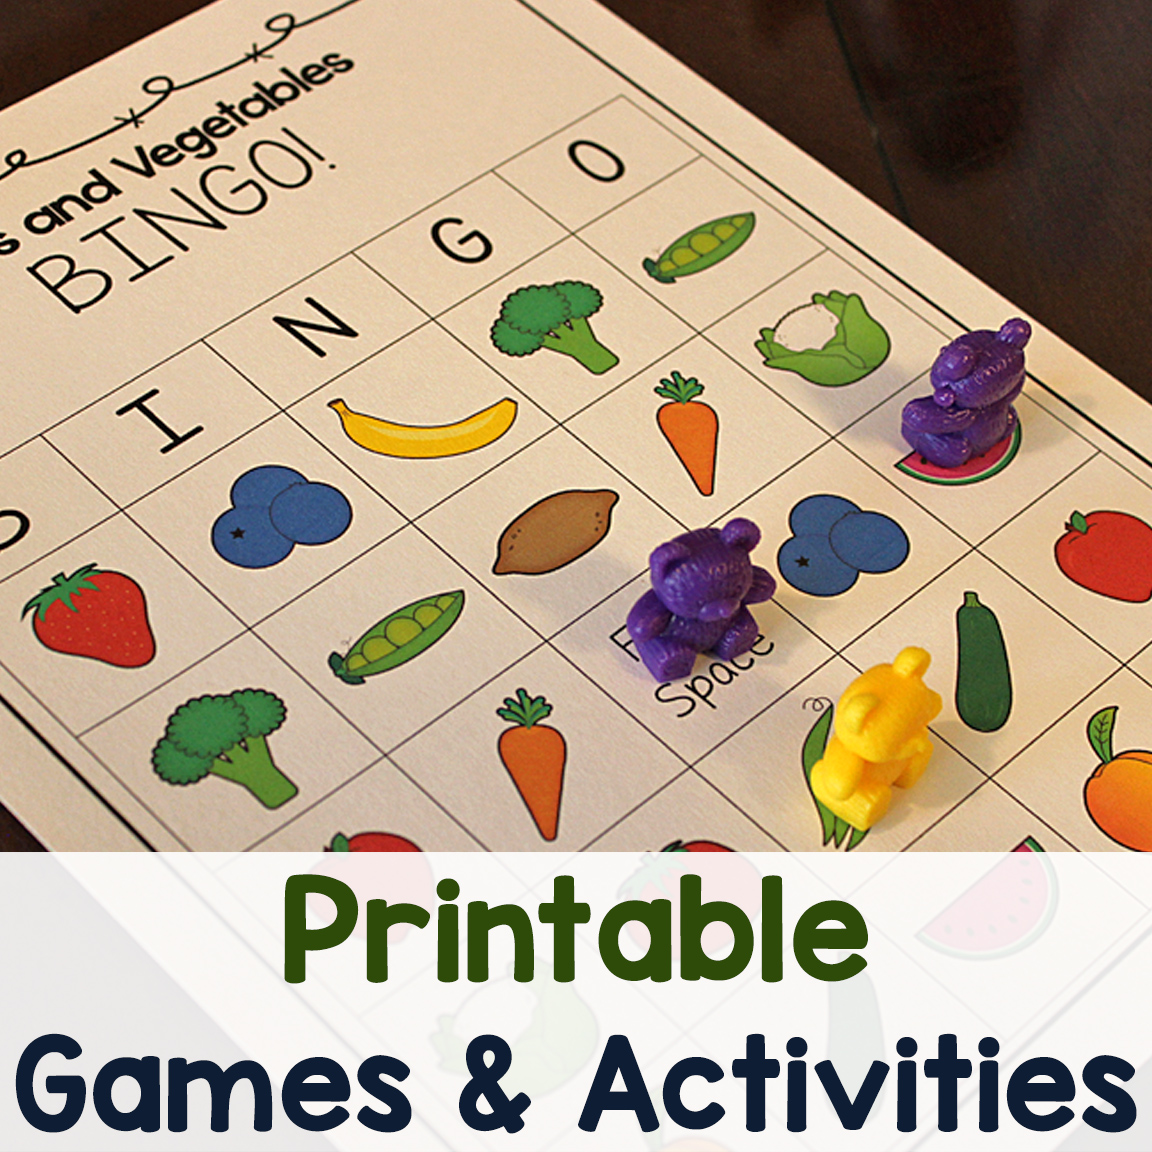 Printable Games and Activities